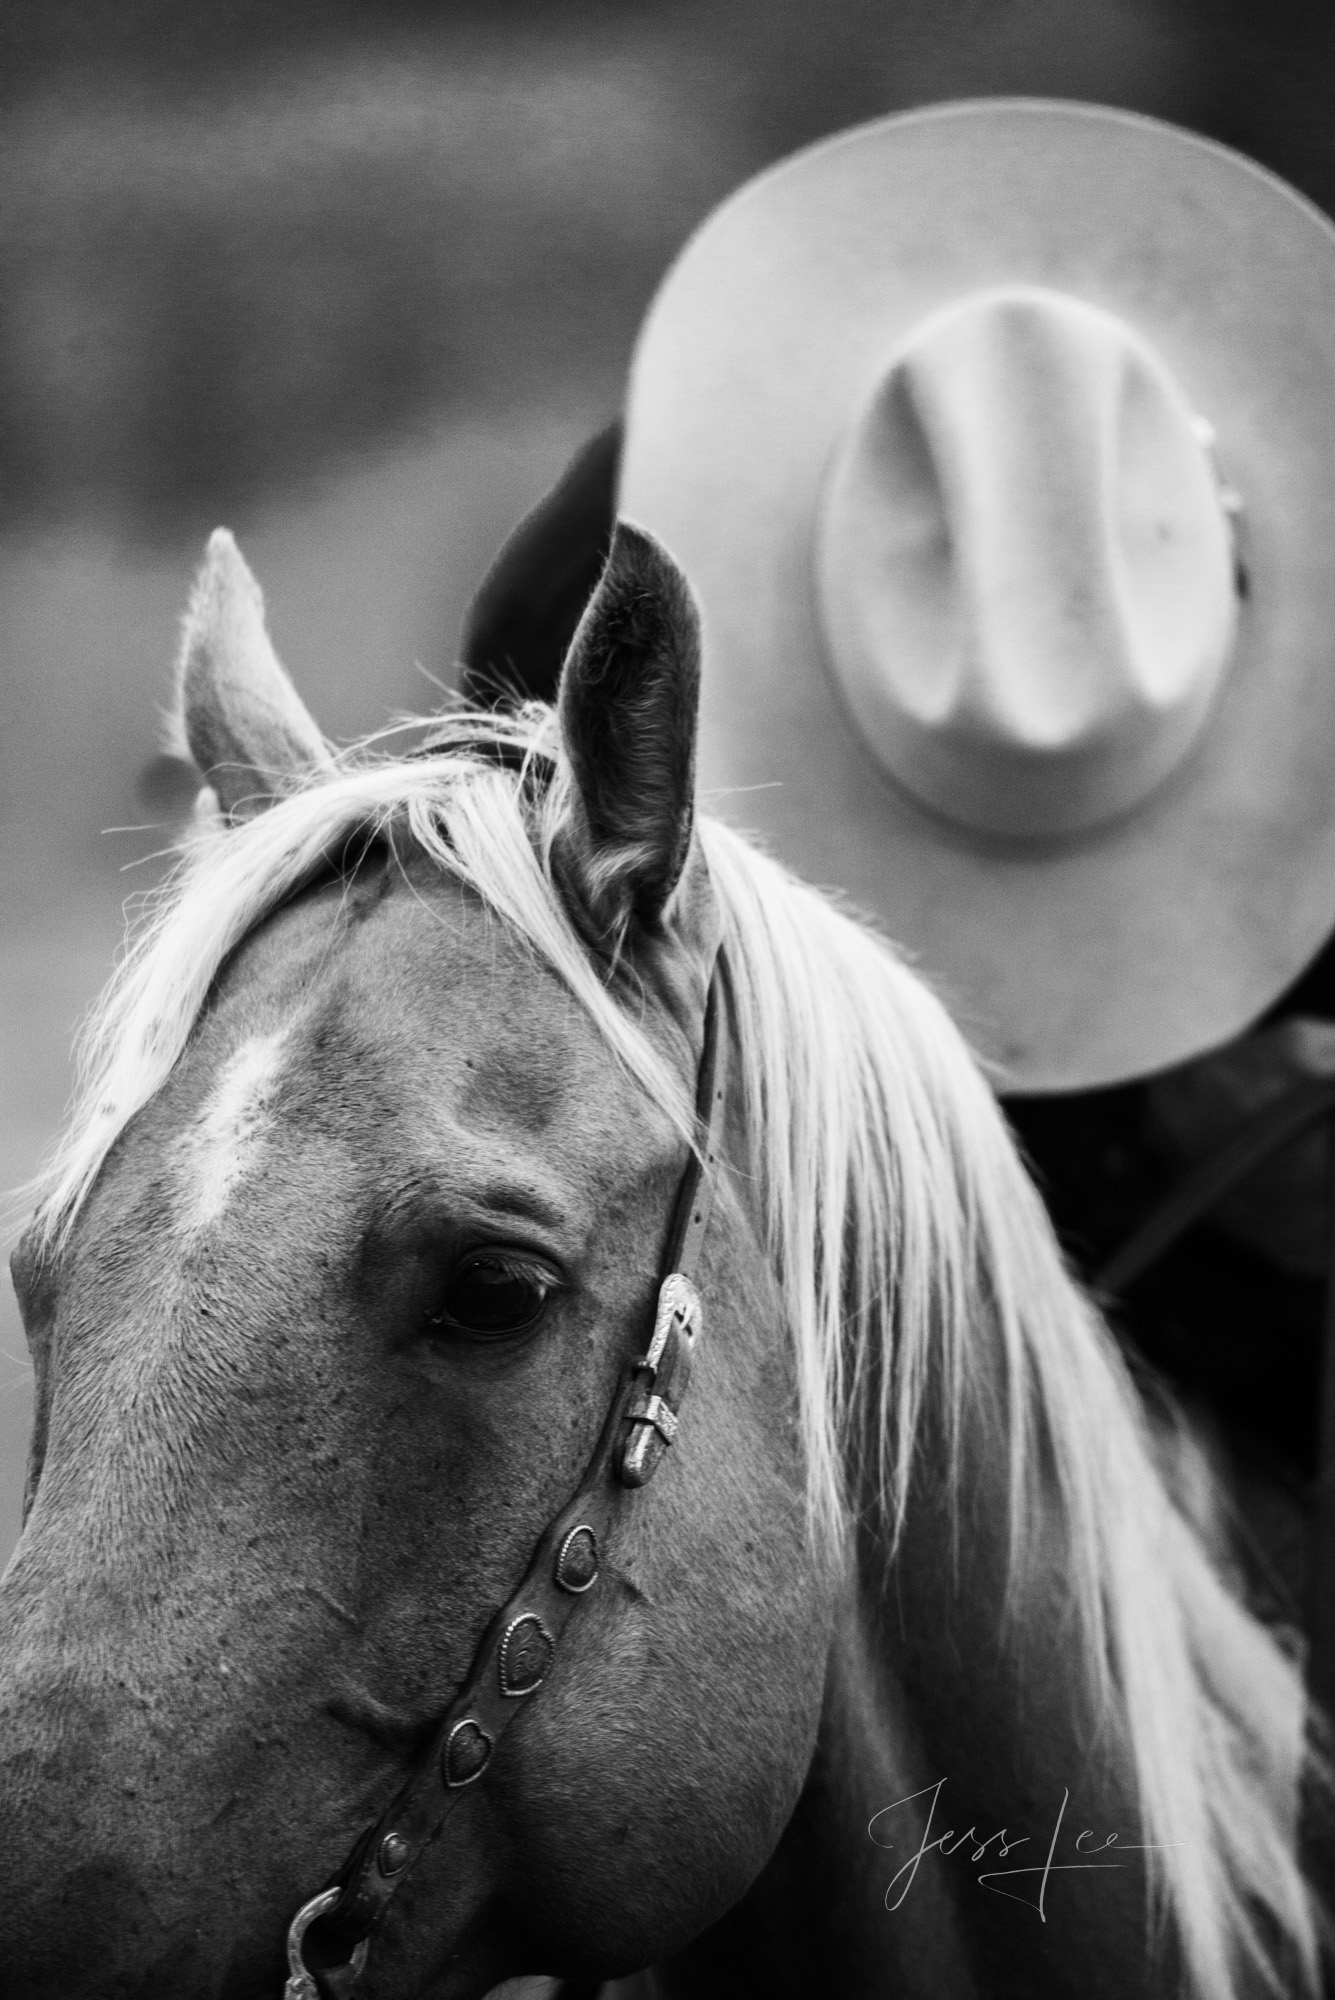 Fine Art Limited Edition Photo Prints of Cowboys, Horses, and life in the West. He is snoring. Cowboy pictures in black and white...